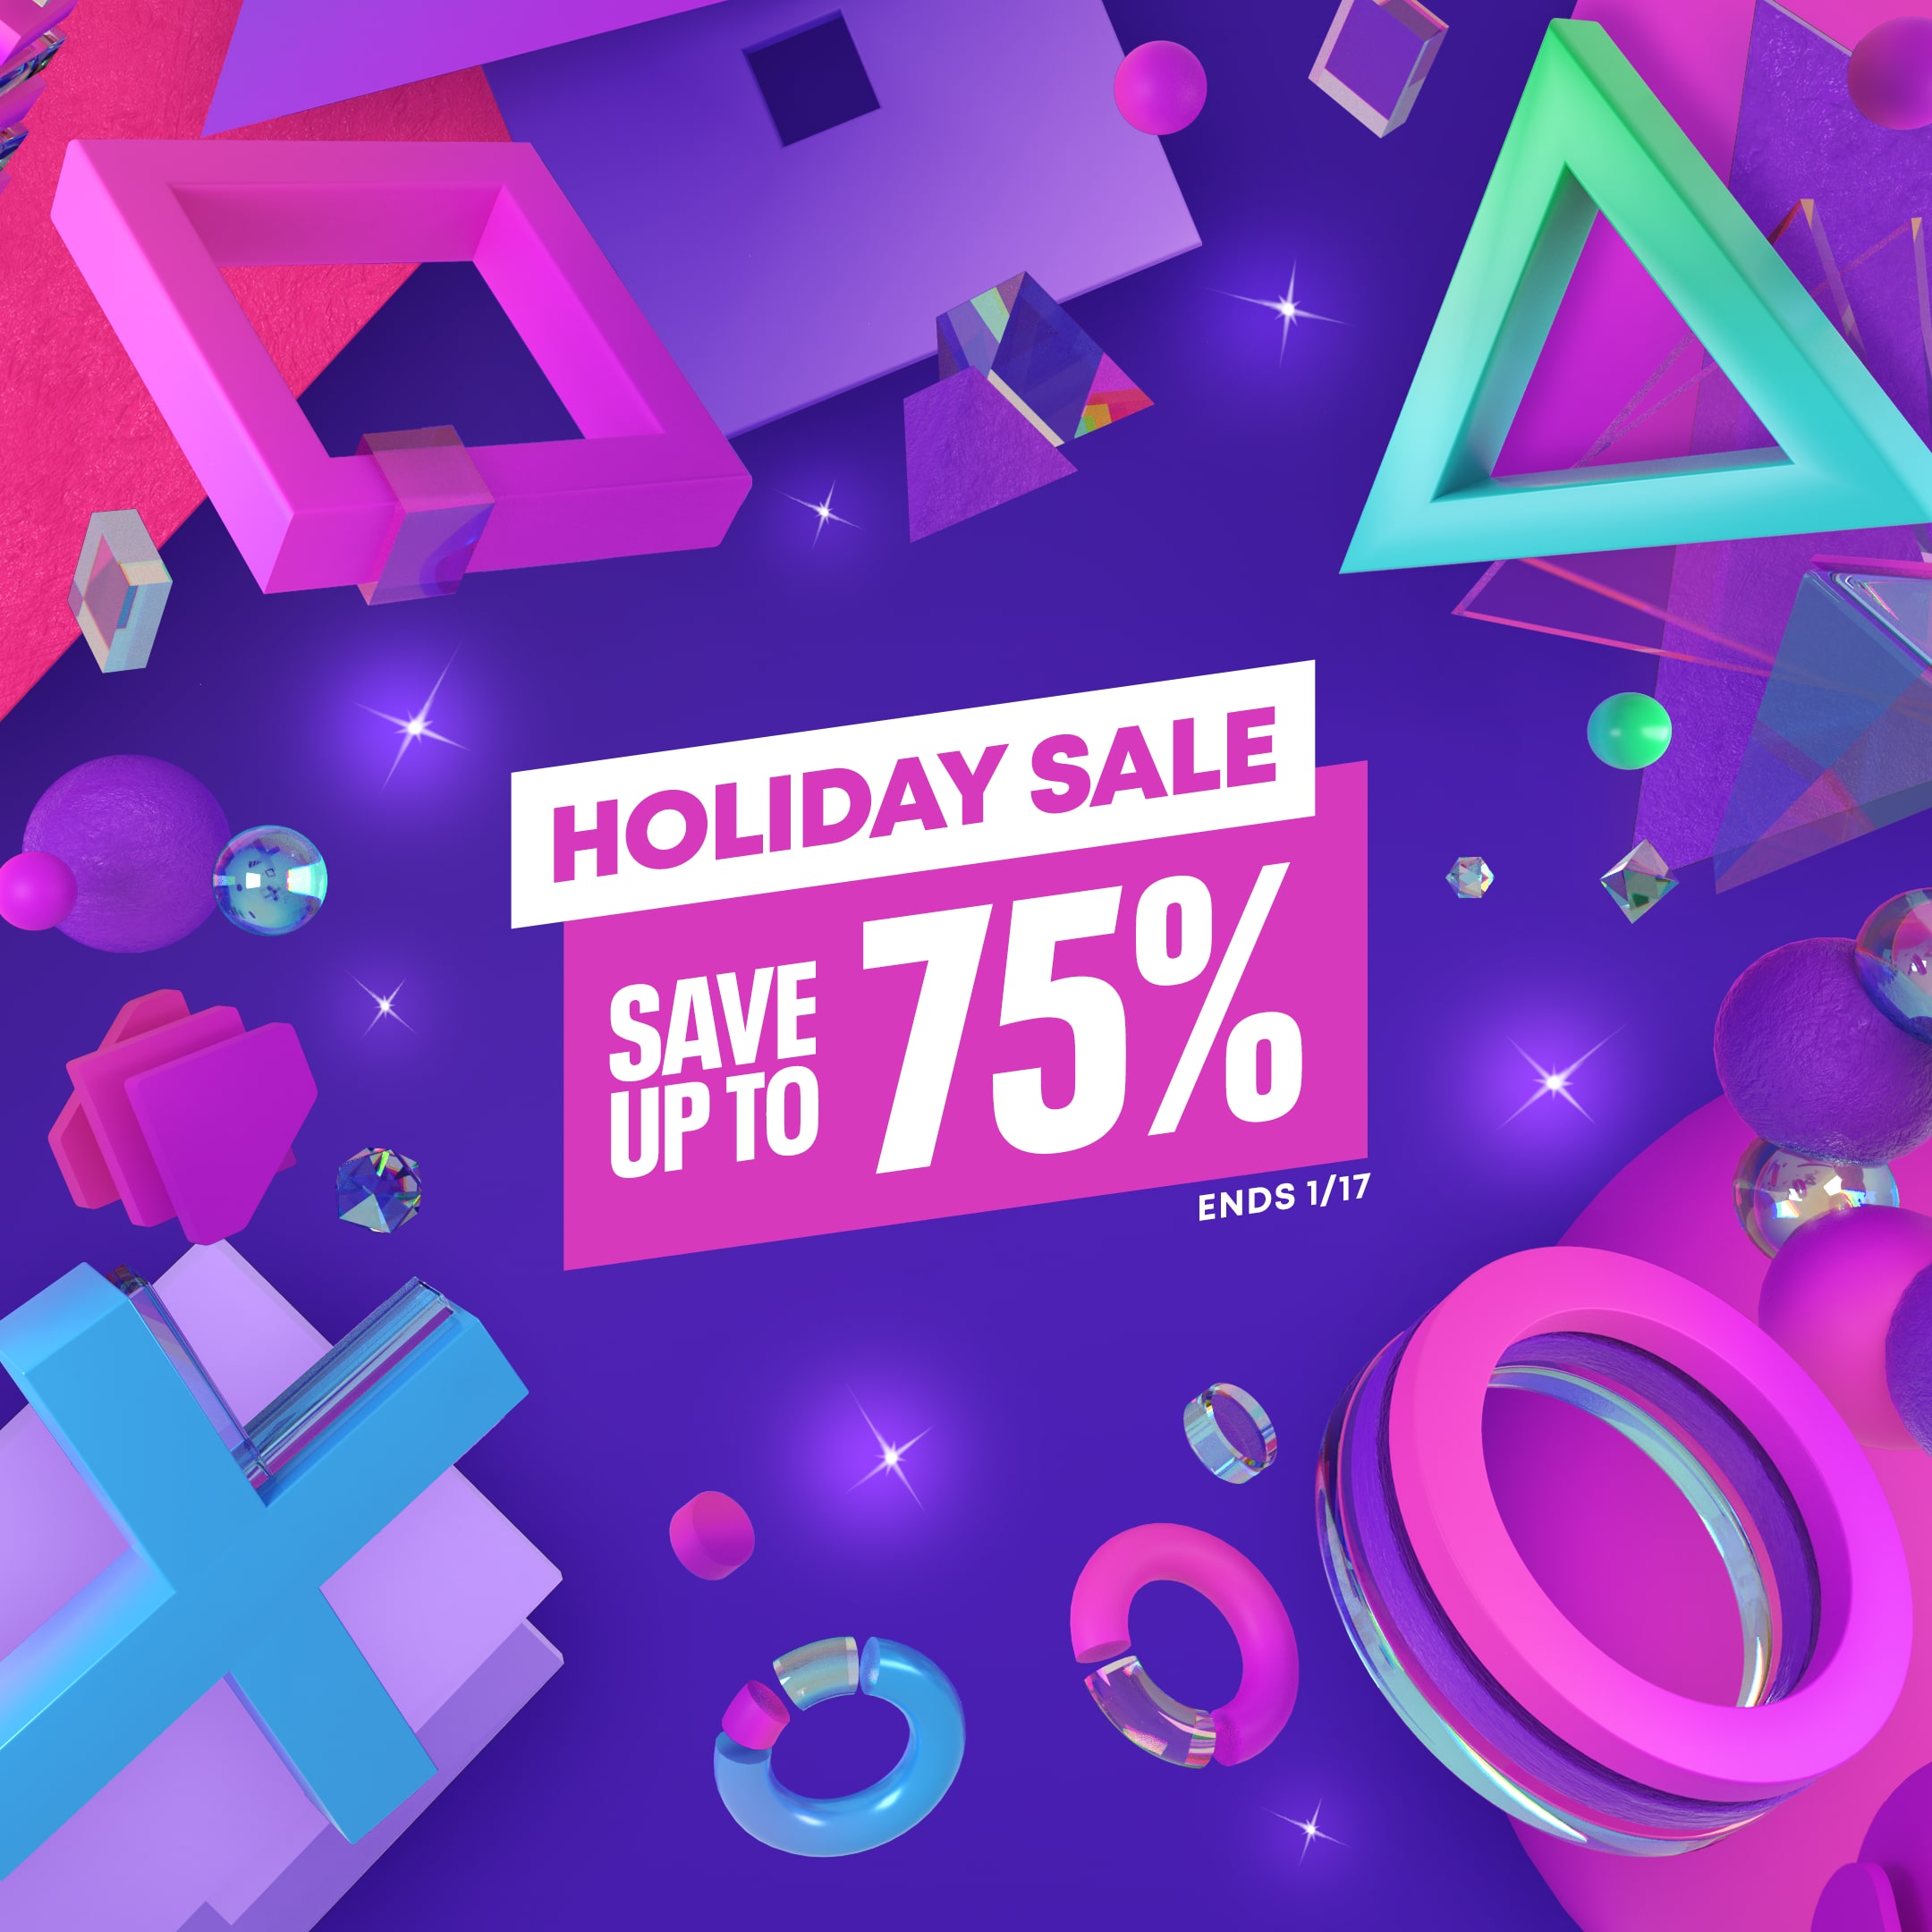 PlayStation holiday sale discounts PS Plus Extra and Premium by up